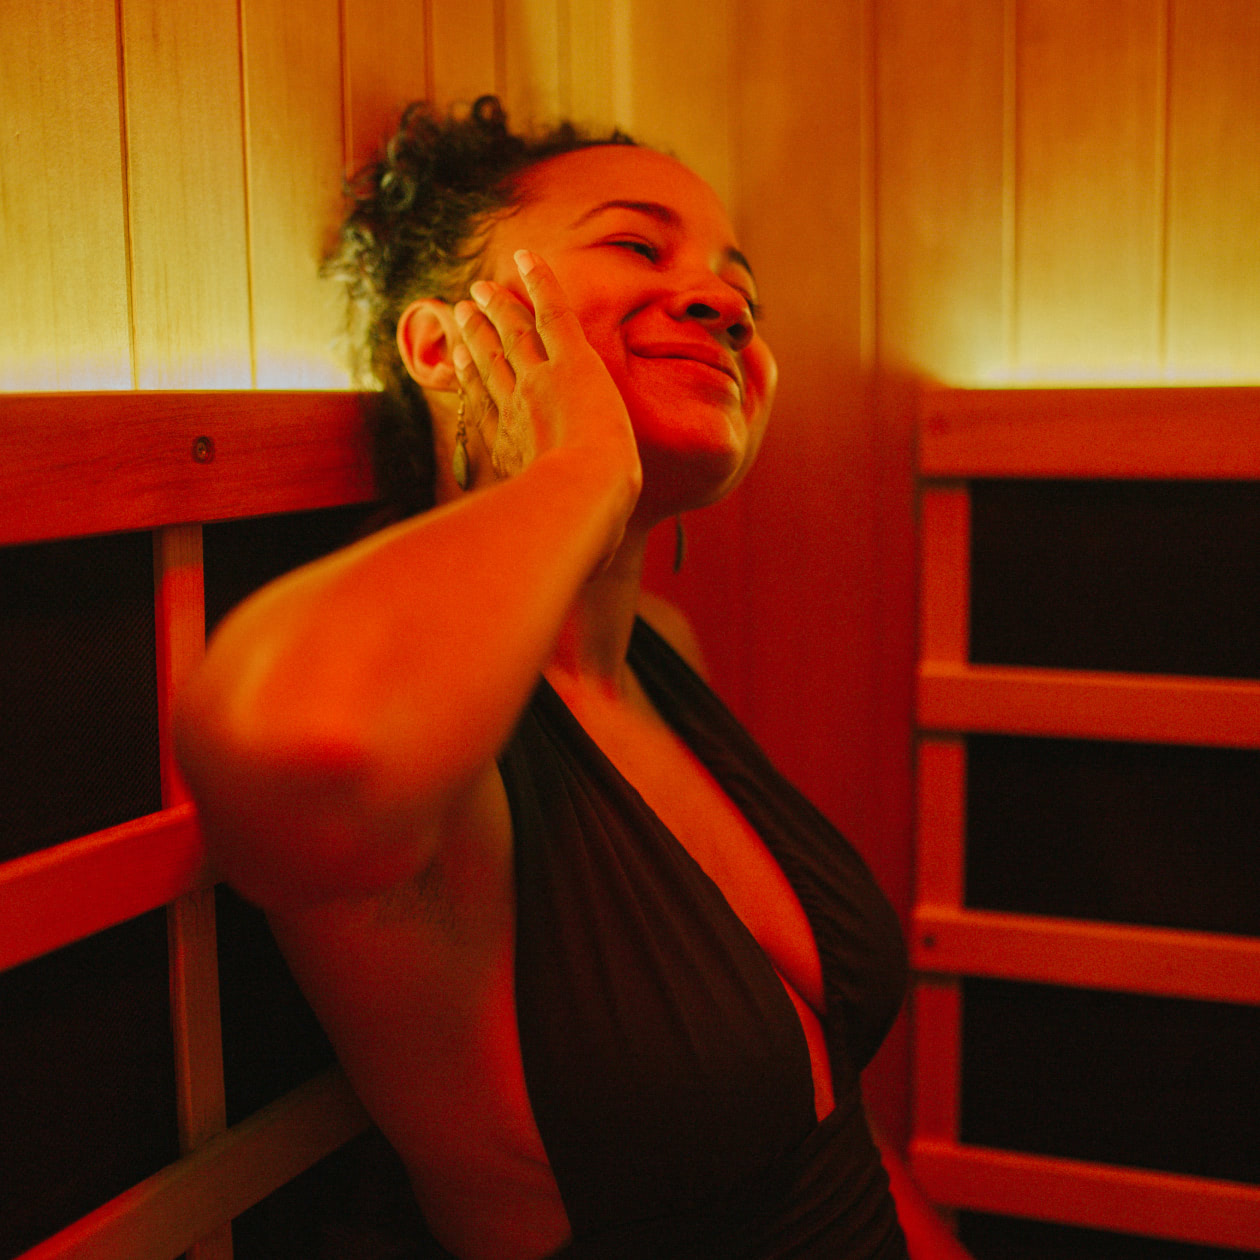 Woman smiling in the infrared sauna getting a good sweat going